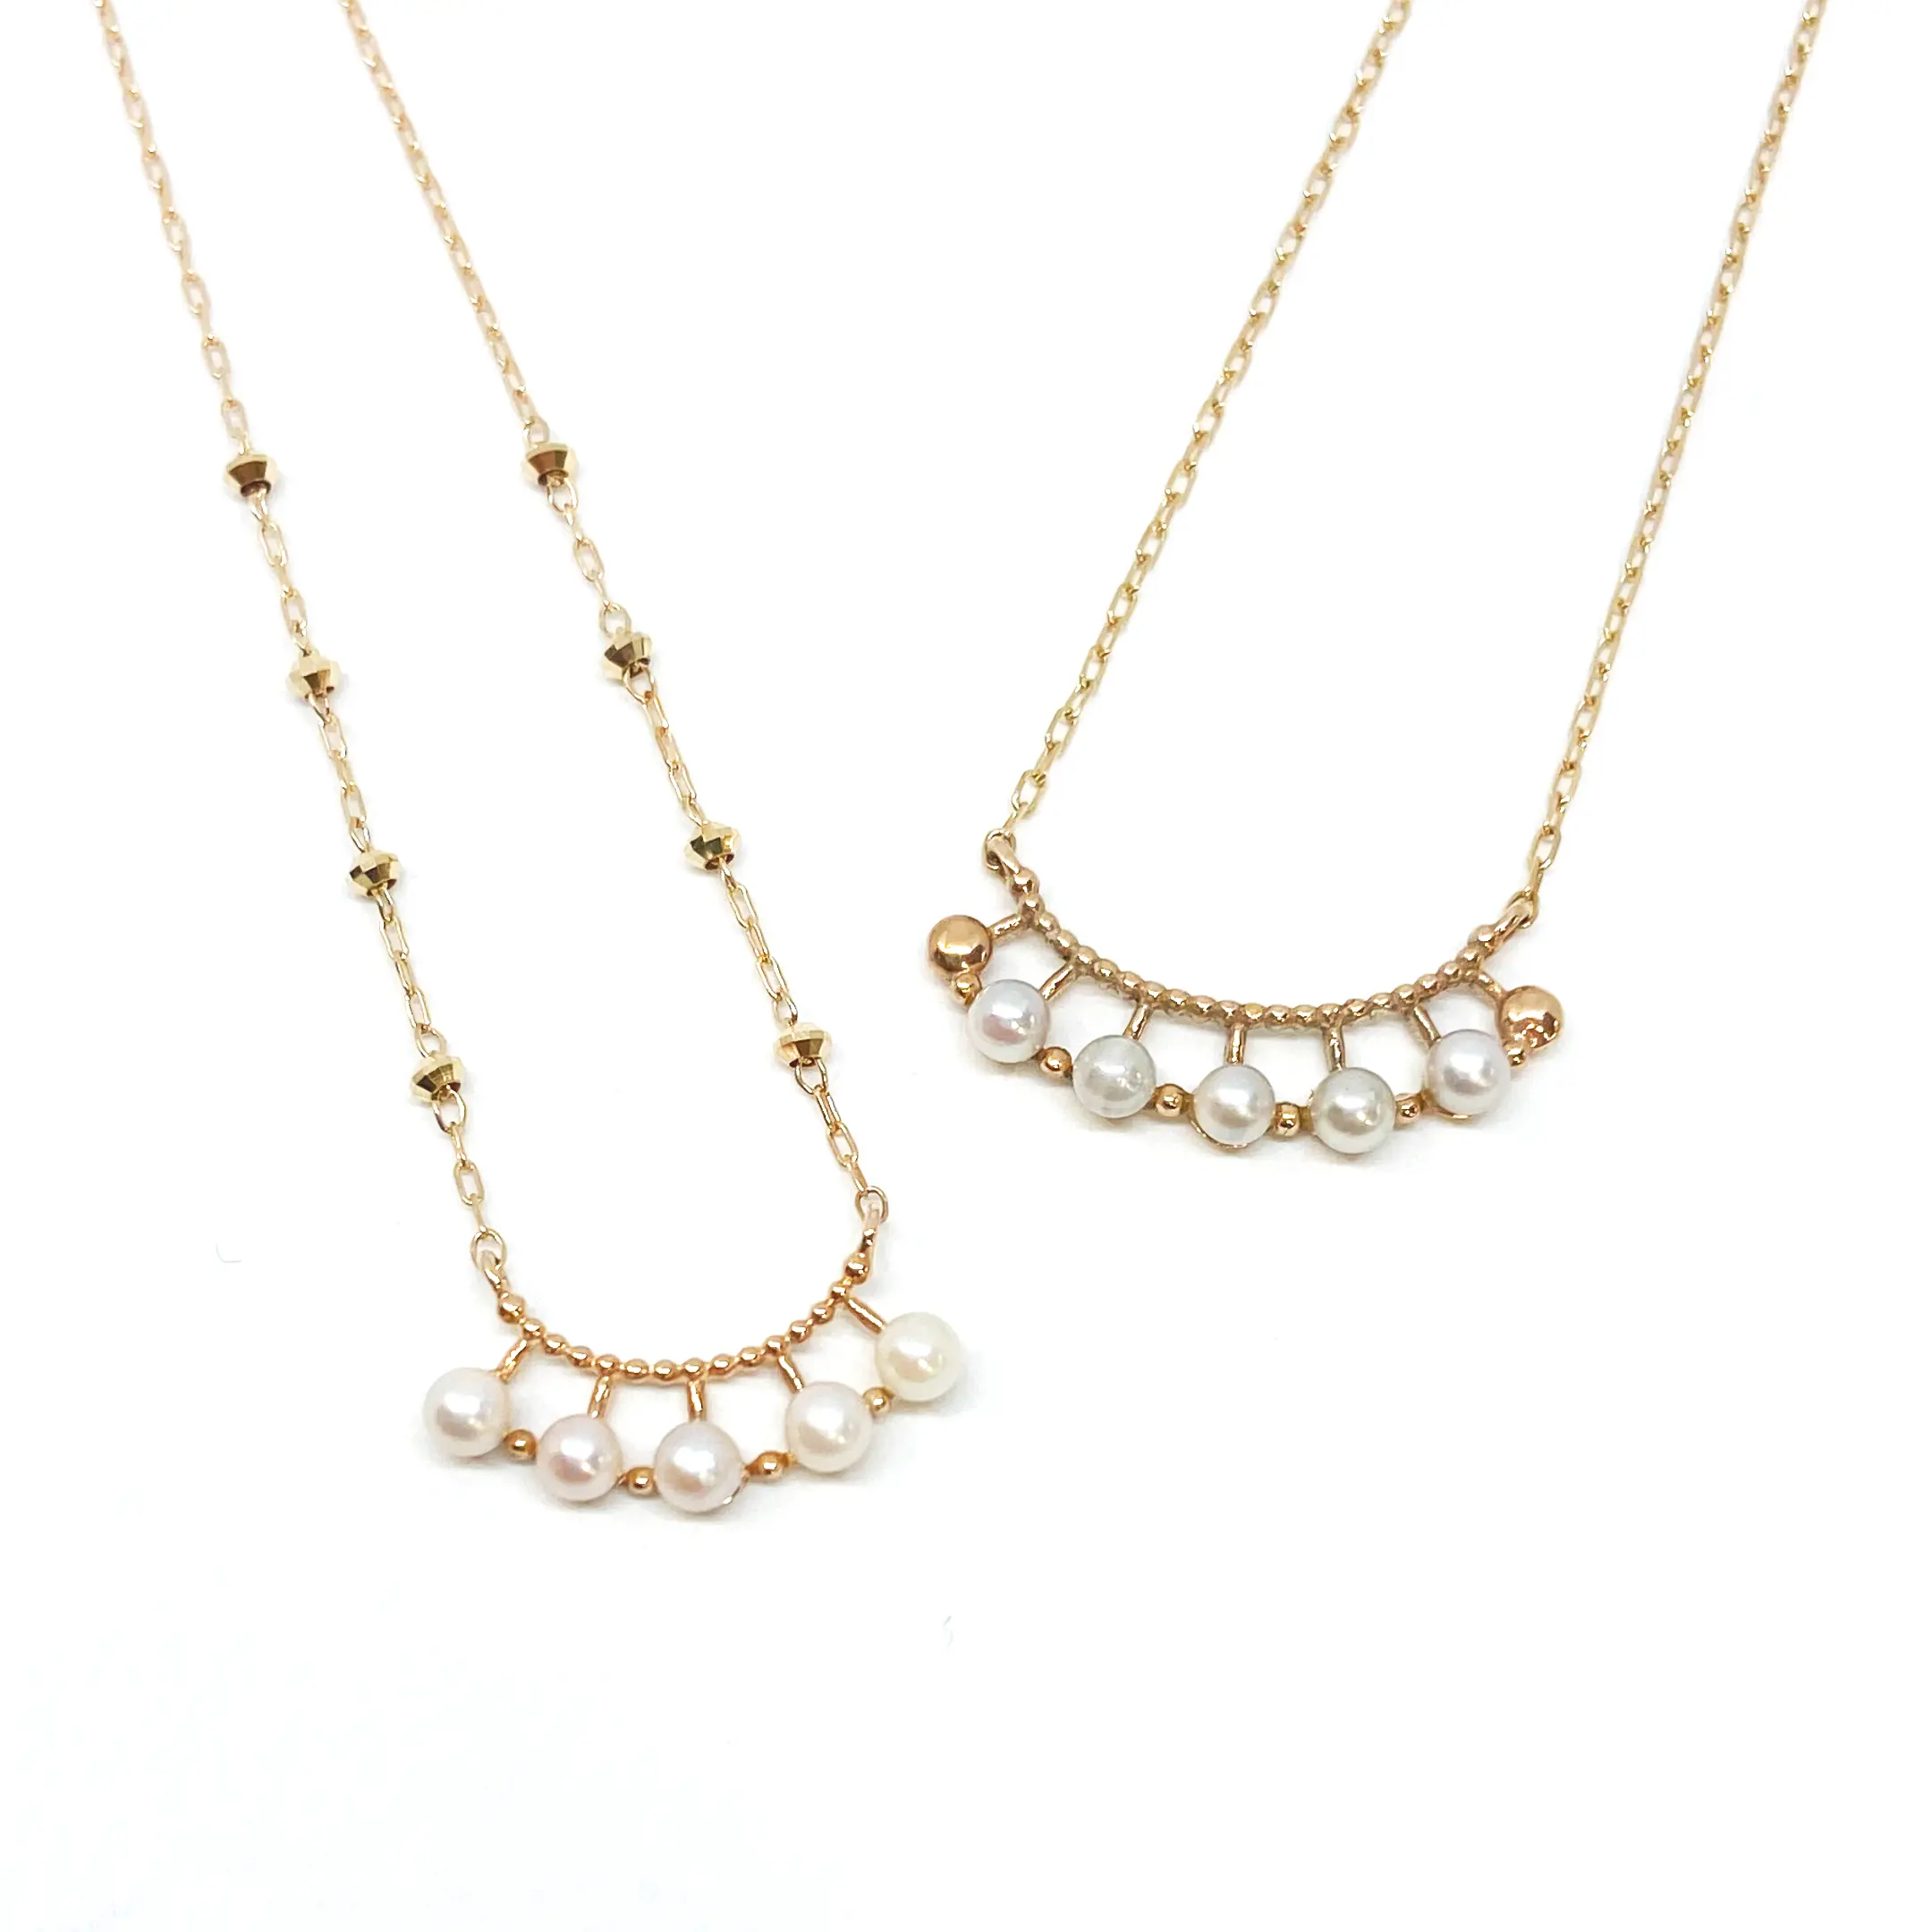 Sustainable sell well various unique Japan ladies high fashion jewelry gold k10 pearl necklace